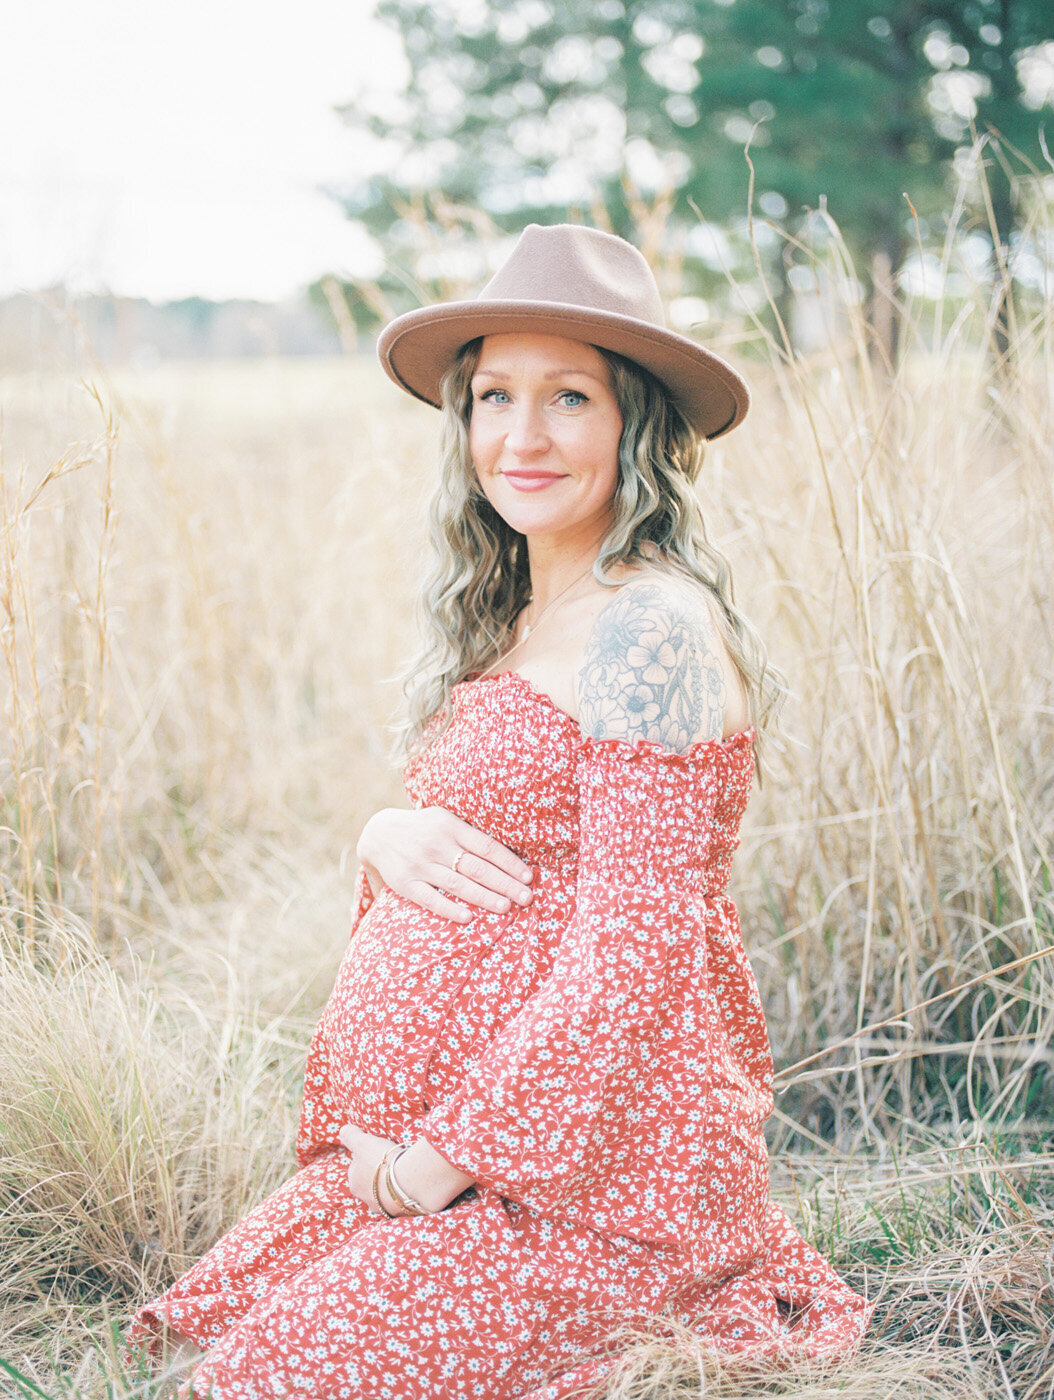 Raleigh Maternity Photographer | Jessica Agee Photography - 002